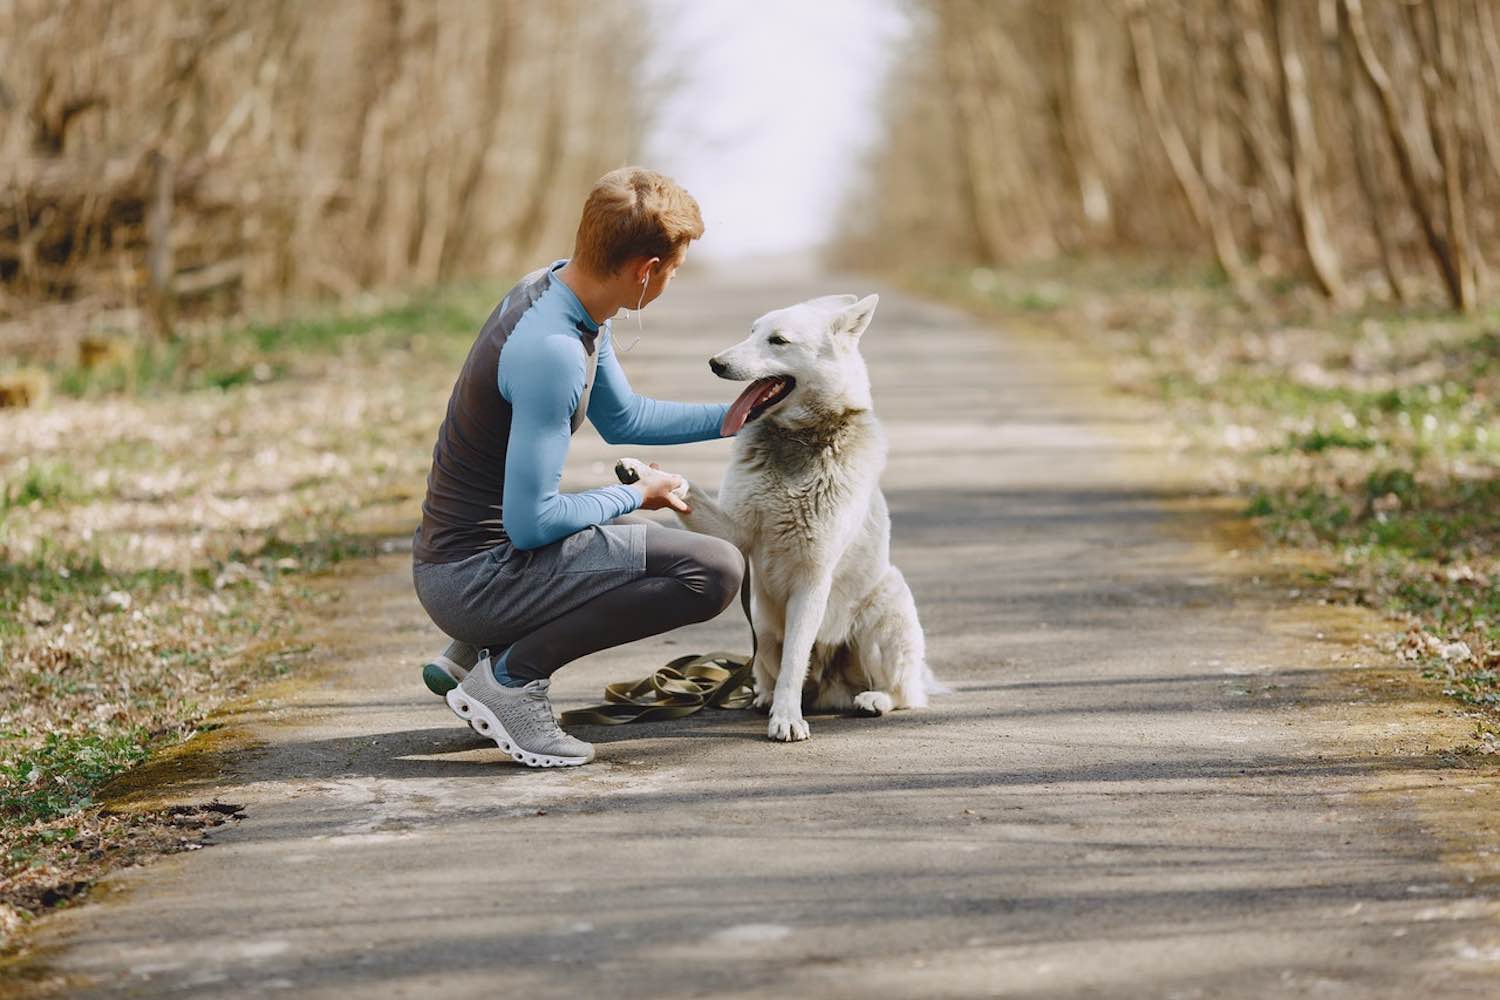 5 Reasons Dogs Make Our Lives Better